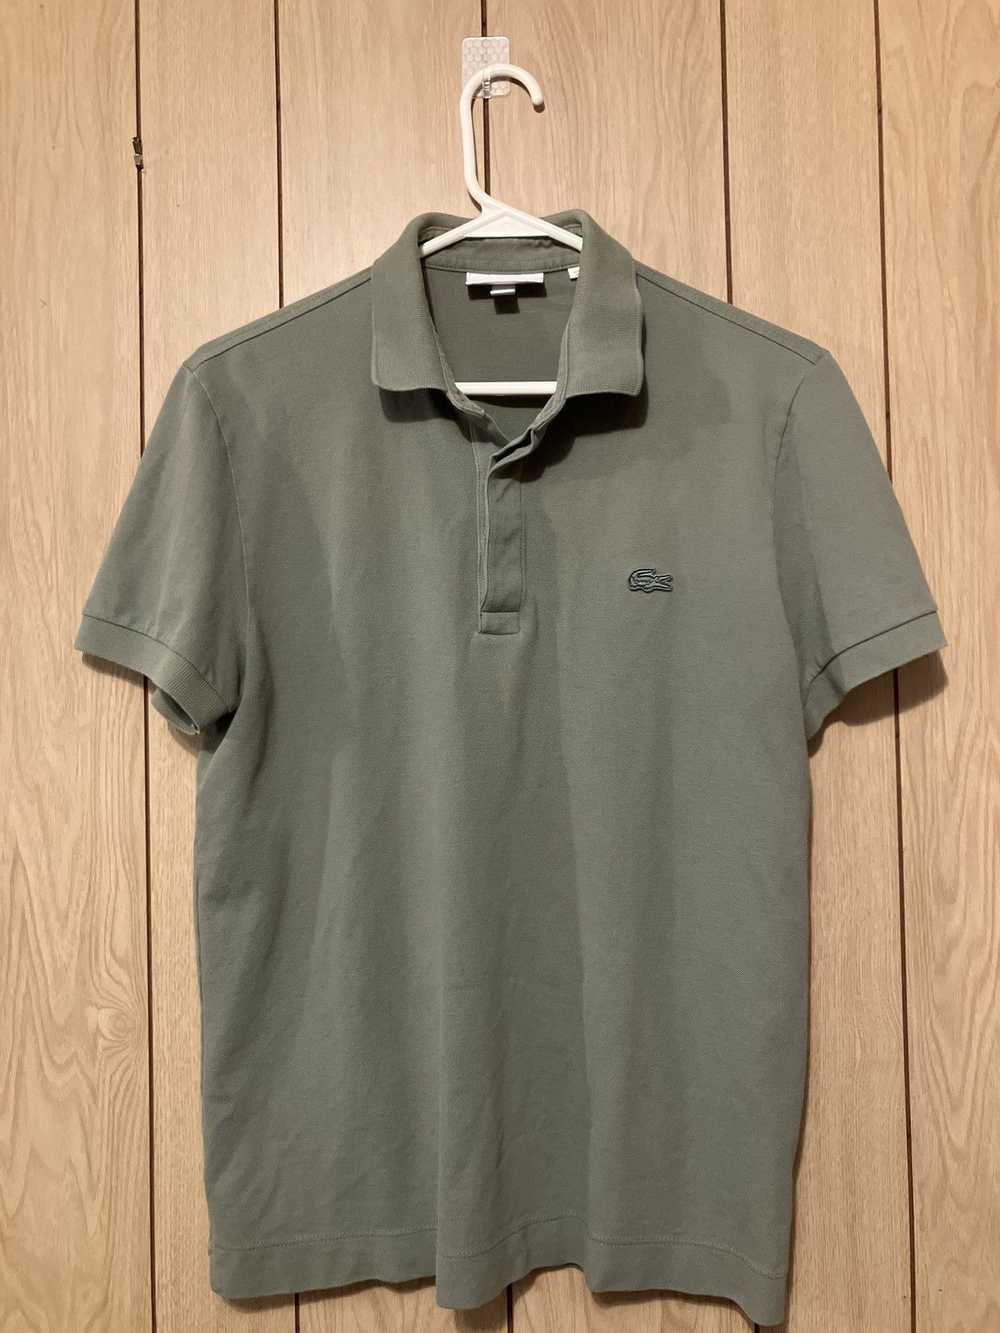 Lacoste Lacoste Polo Shirt. Small - image 7